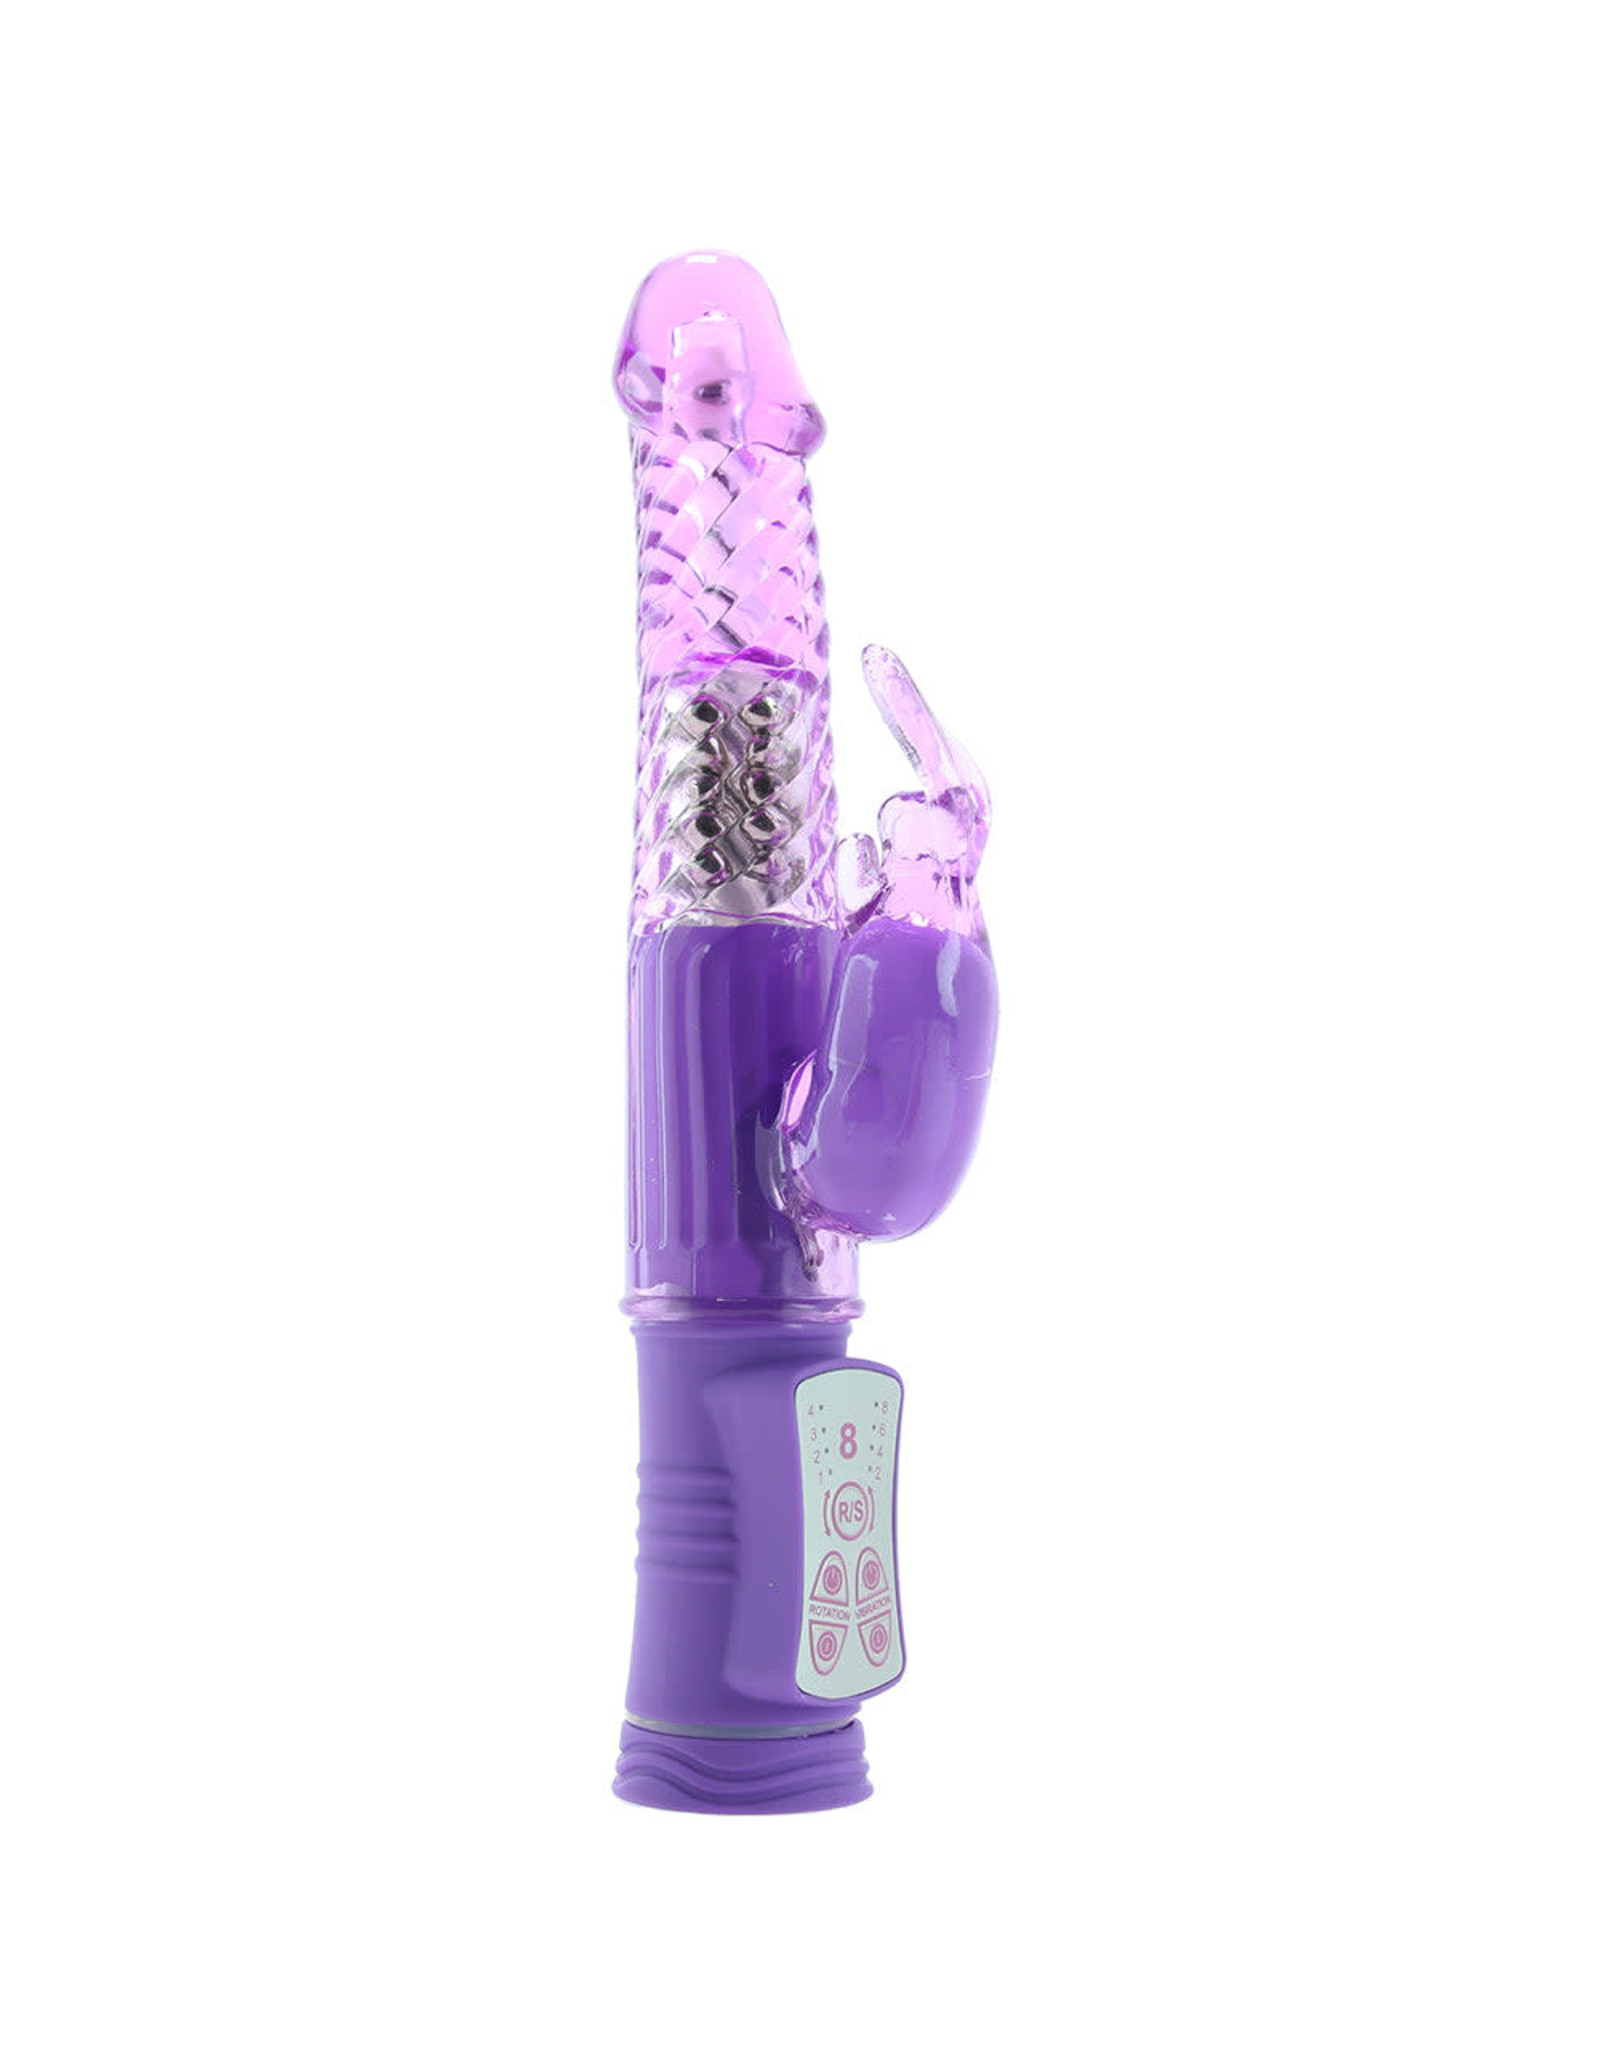 ADAM & EVE EVOLVED - EVE'S FIRST RECHARGEABLE RABBIT VIBRATOR